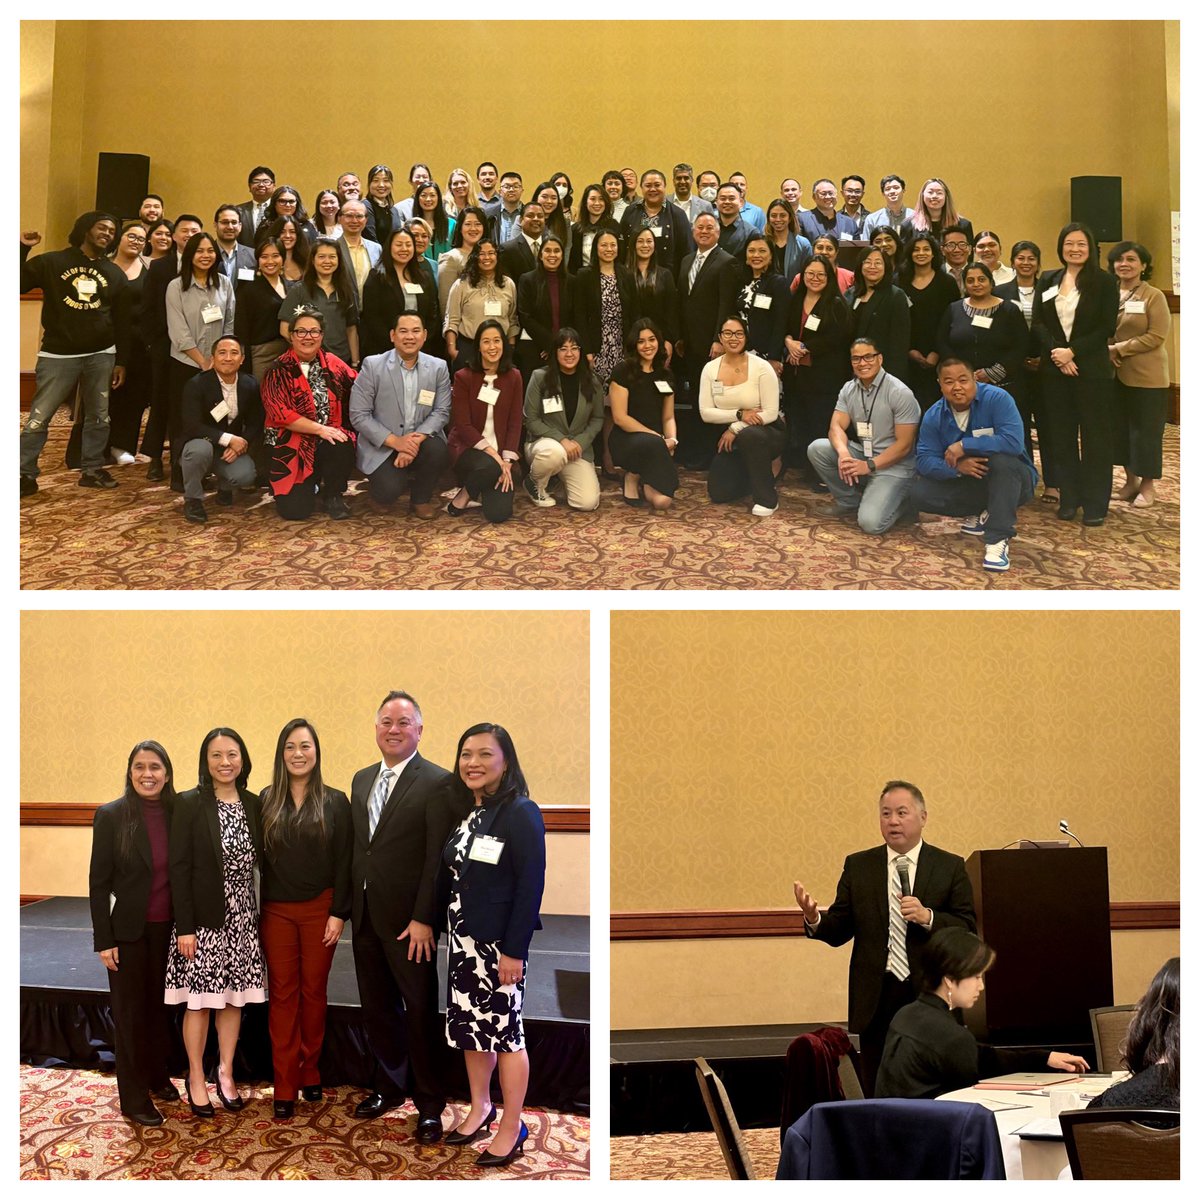 Thank you to community groups for letting me speak this week at their AANHPI Health Equity Convening in Sacramento. Their advocacy work on behalf of underserved populations helps the state see disparities on issues like language access, mental health services & data collection.